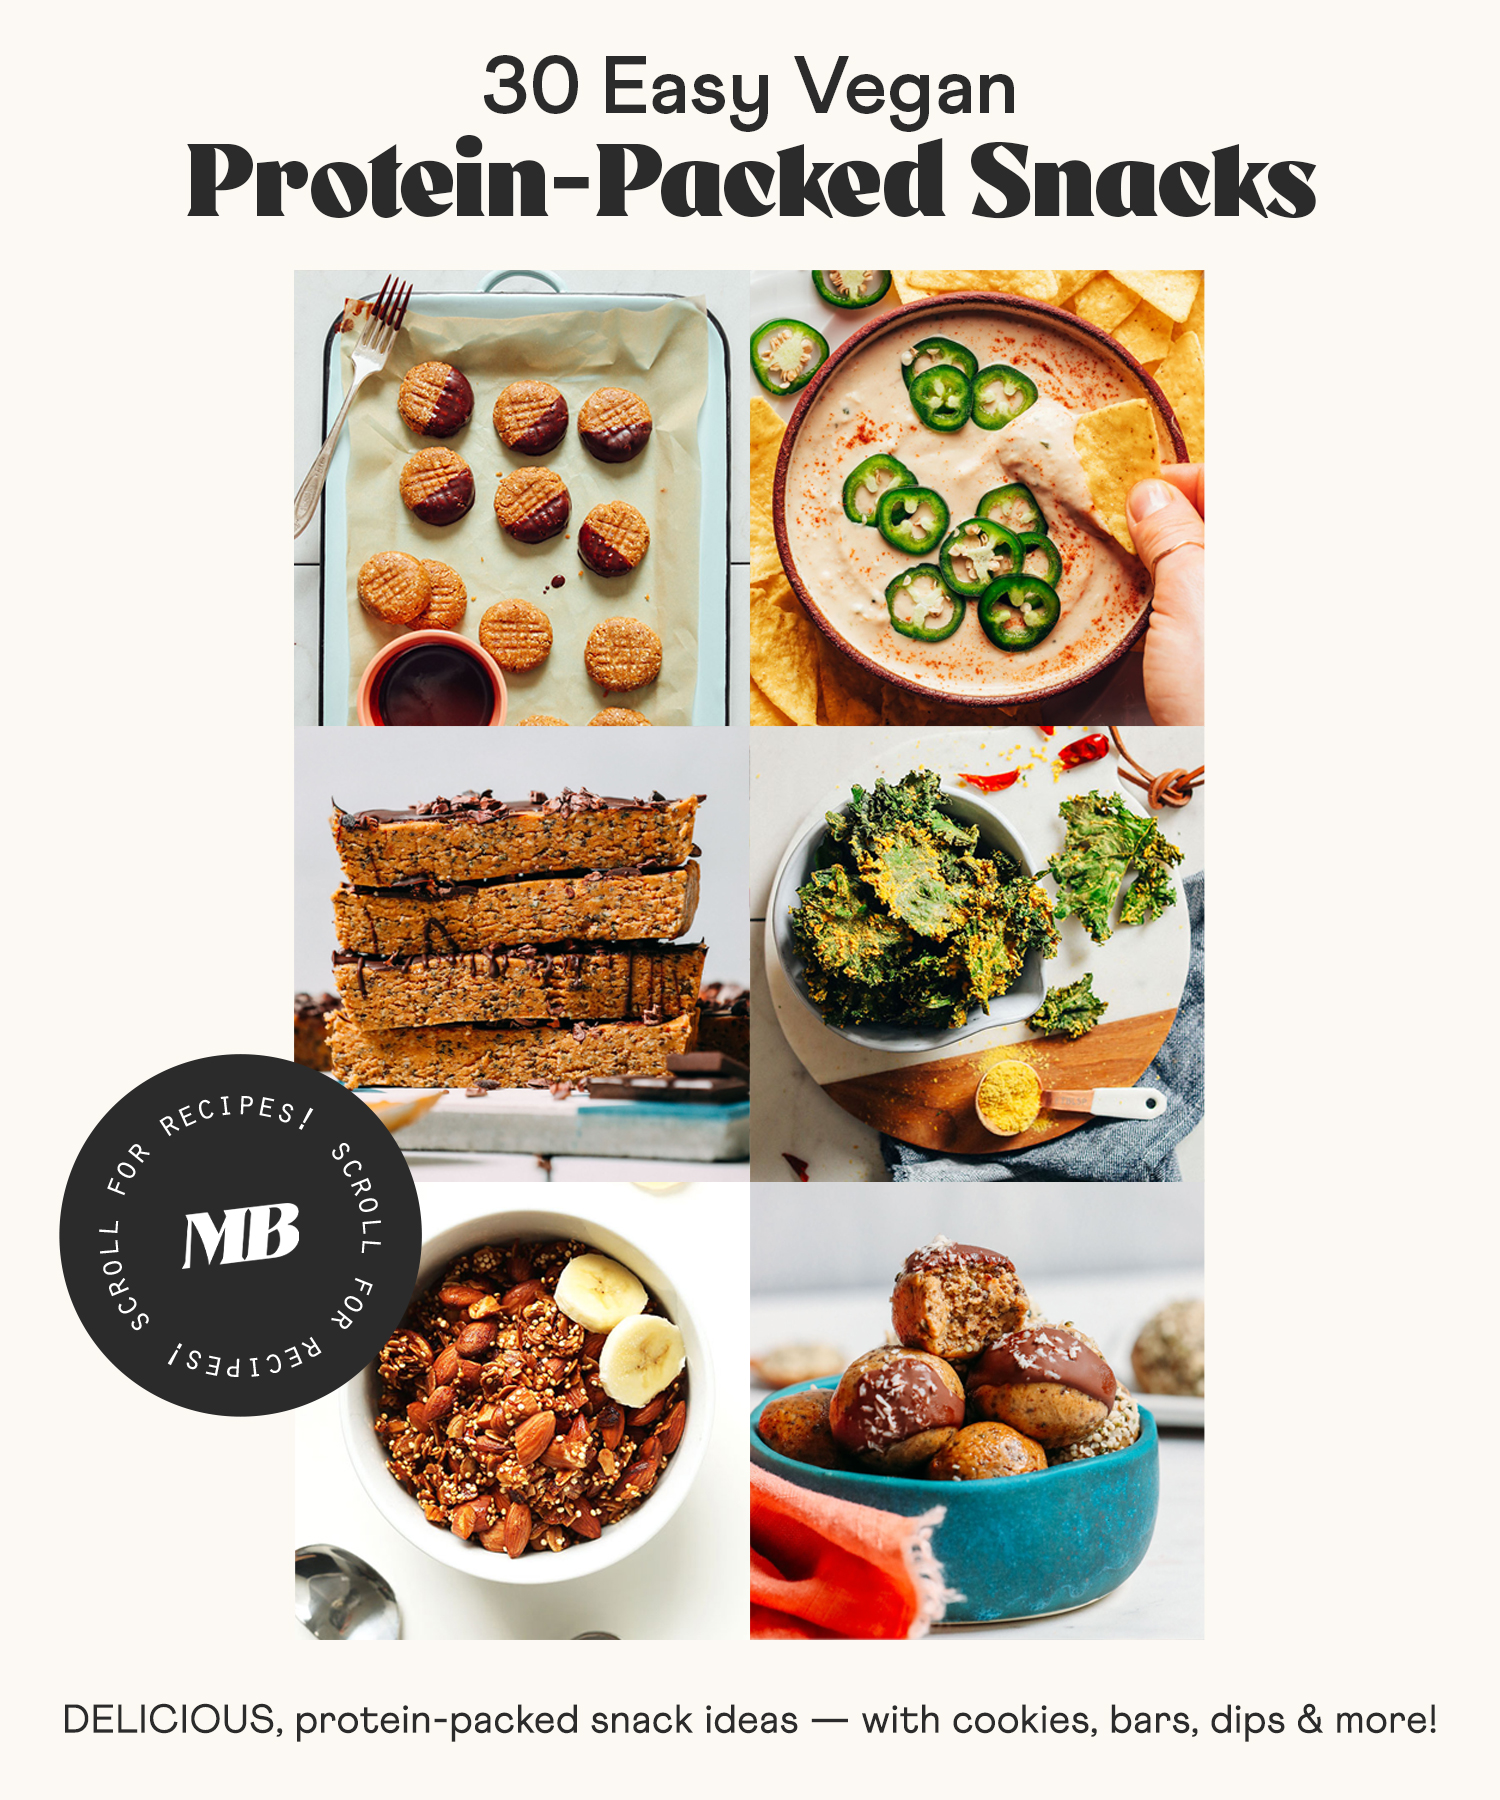 Photos of vegan dips, bars, bites, granola, and other protein-packed snacks